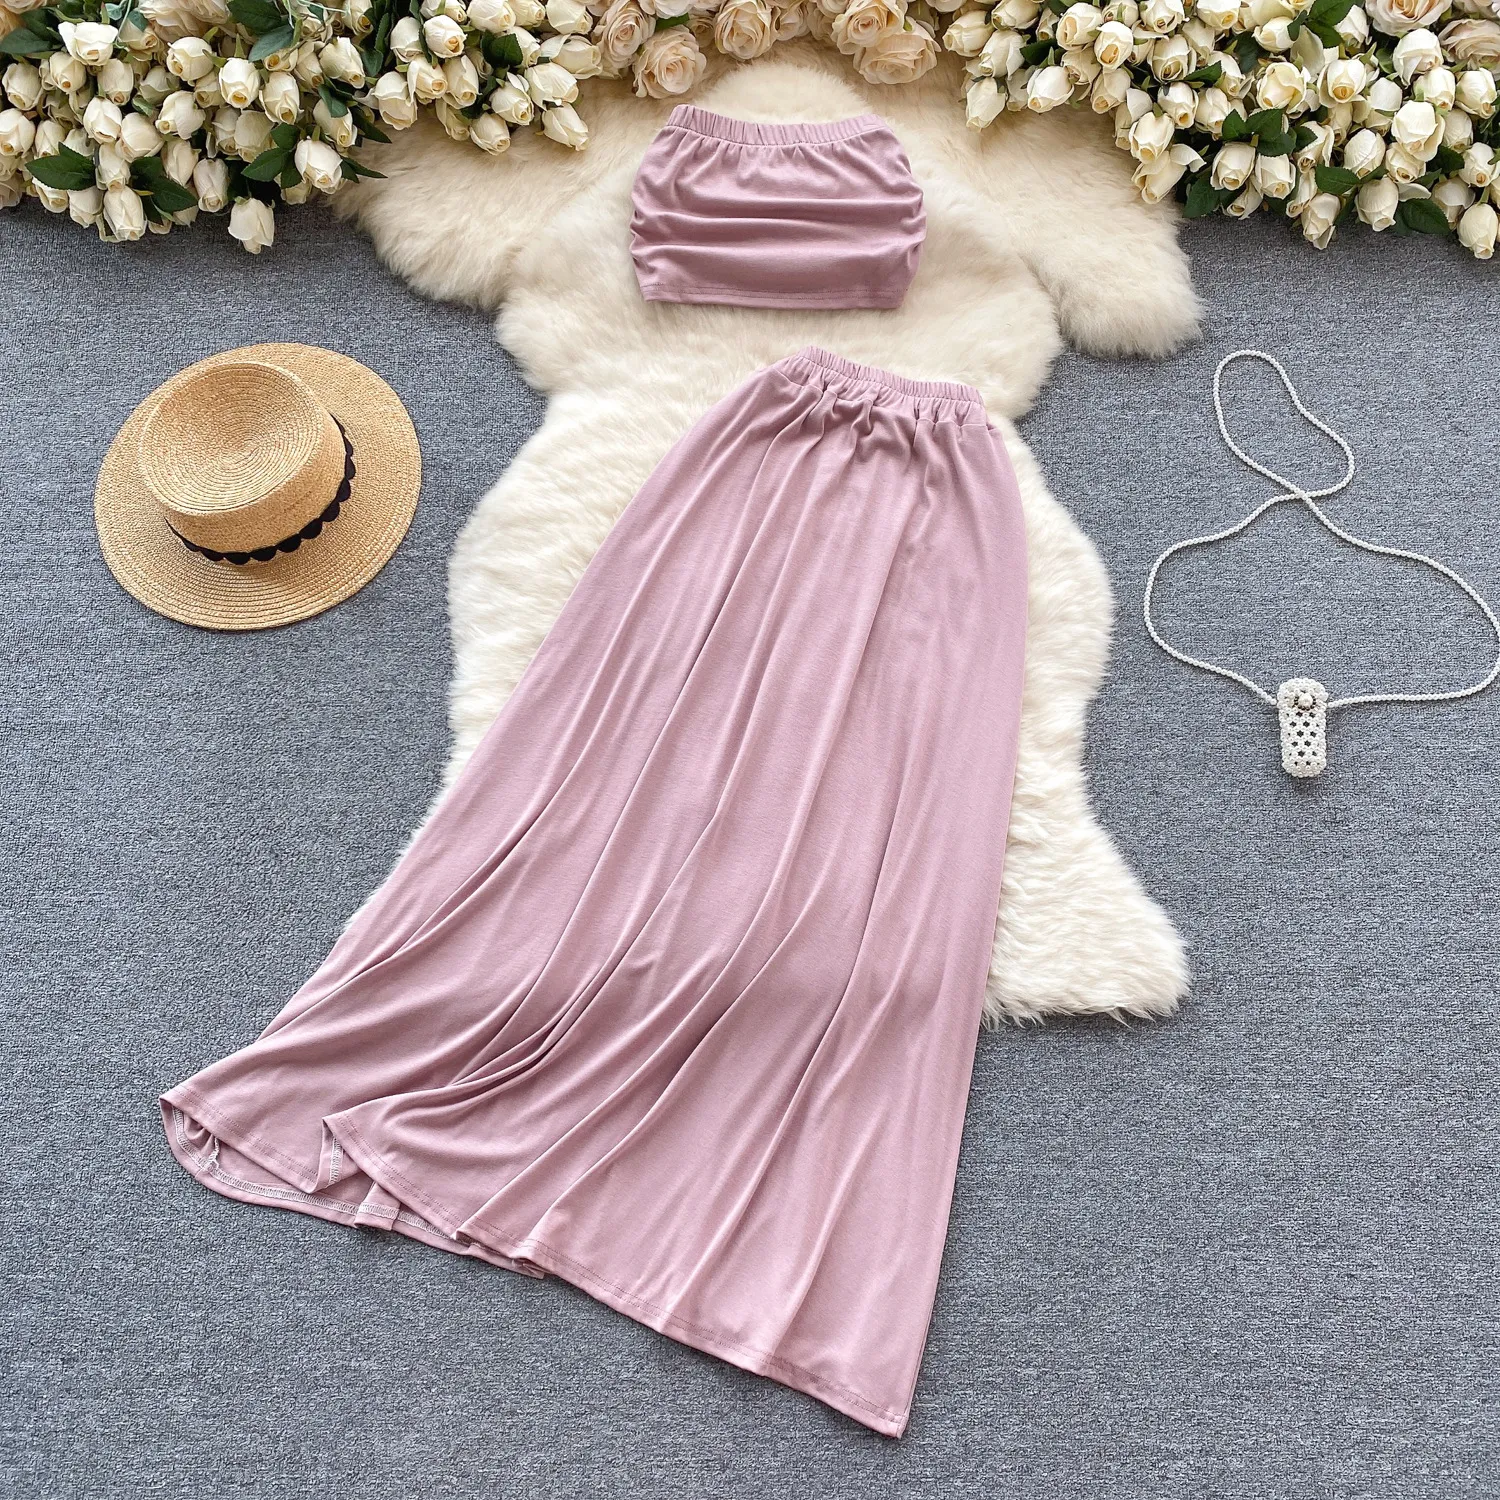 Light luxury fashion leisure vacation style set, women's solid color strapless top+high waisted half body large hem long skirt two-piece set